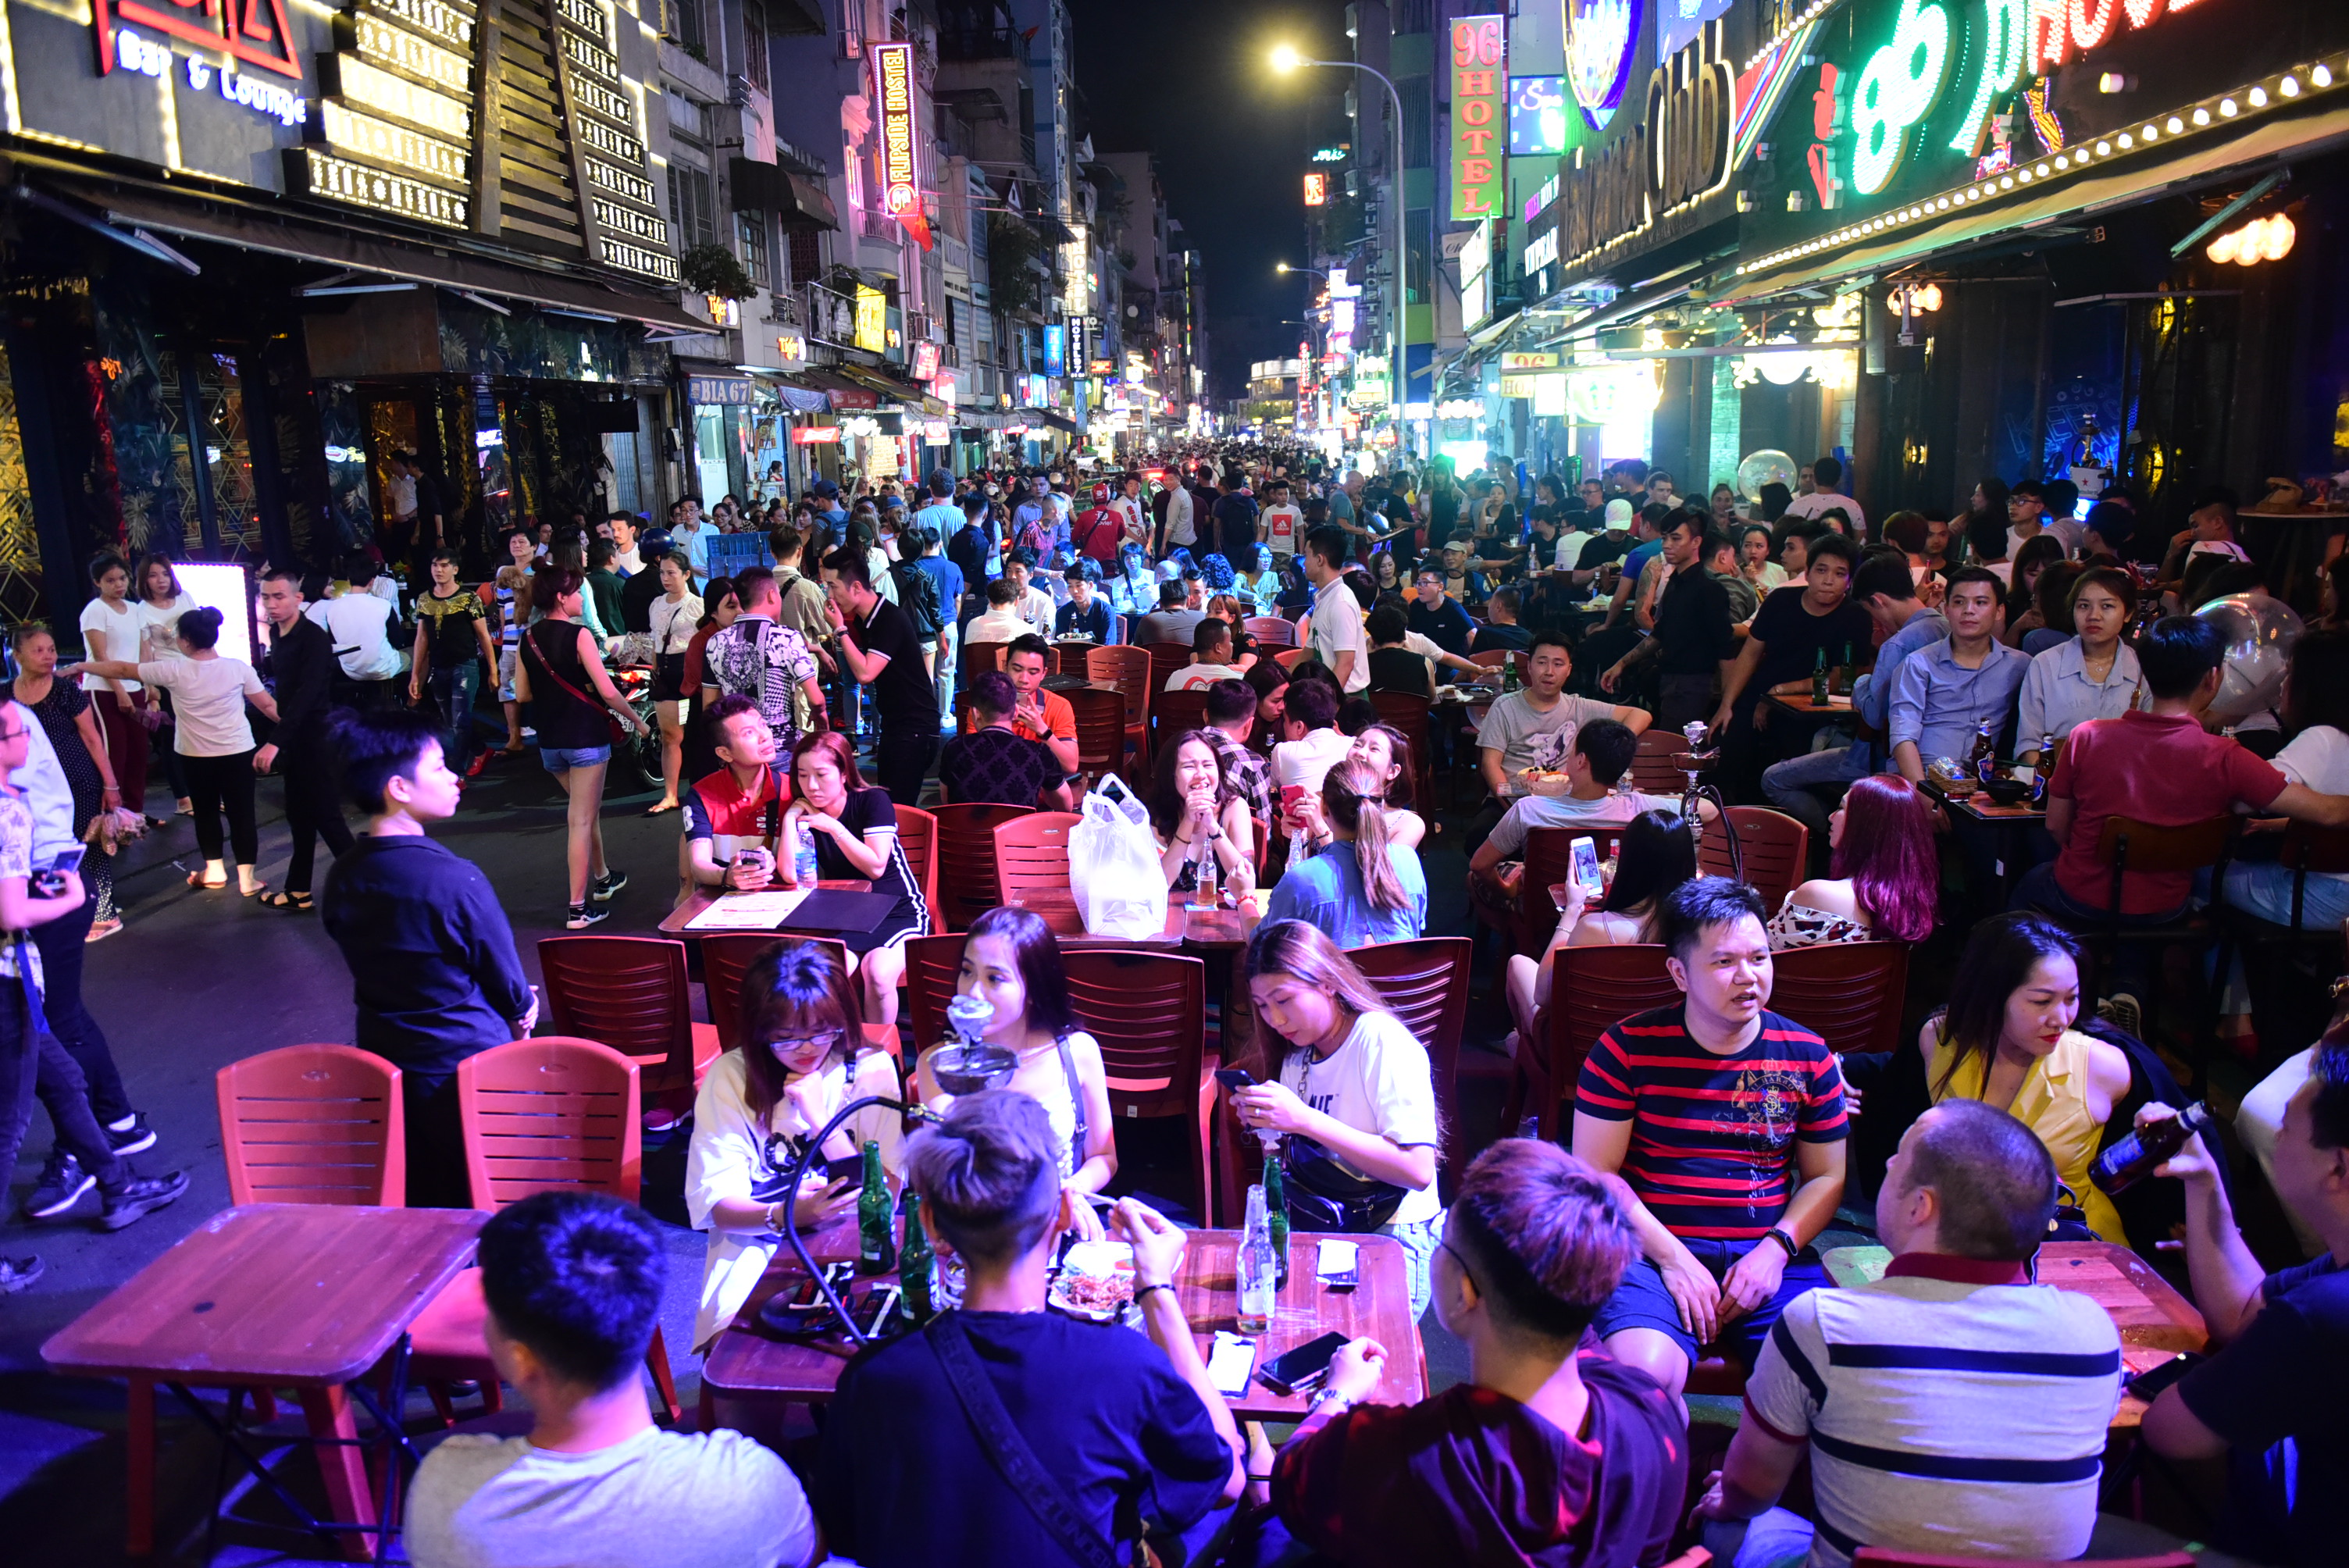 Bui Vien Street in Ho Chi Minh City’s District 1 is packed with visitors in a photo taken on a weekday at around 10pm on April 11, 2019. Photo: Quang Dinh / Tuoi Tre